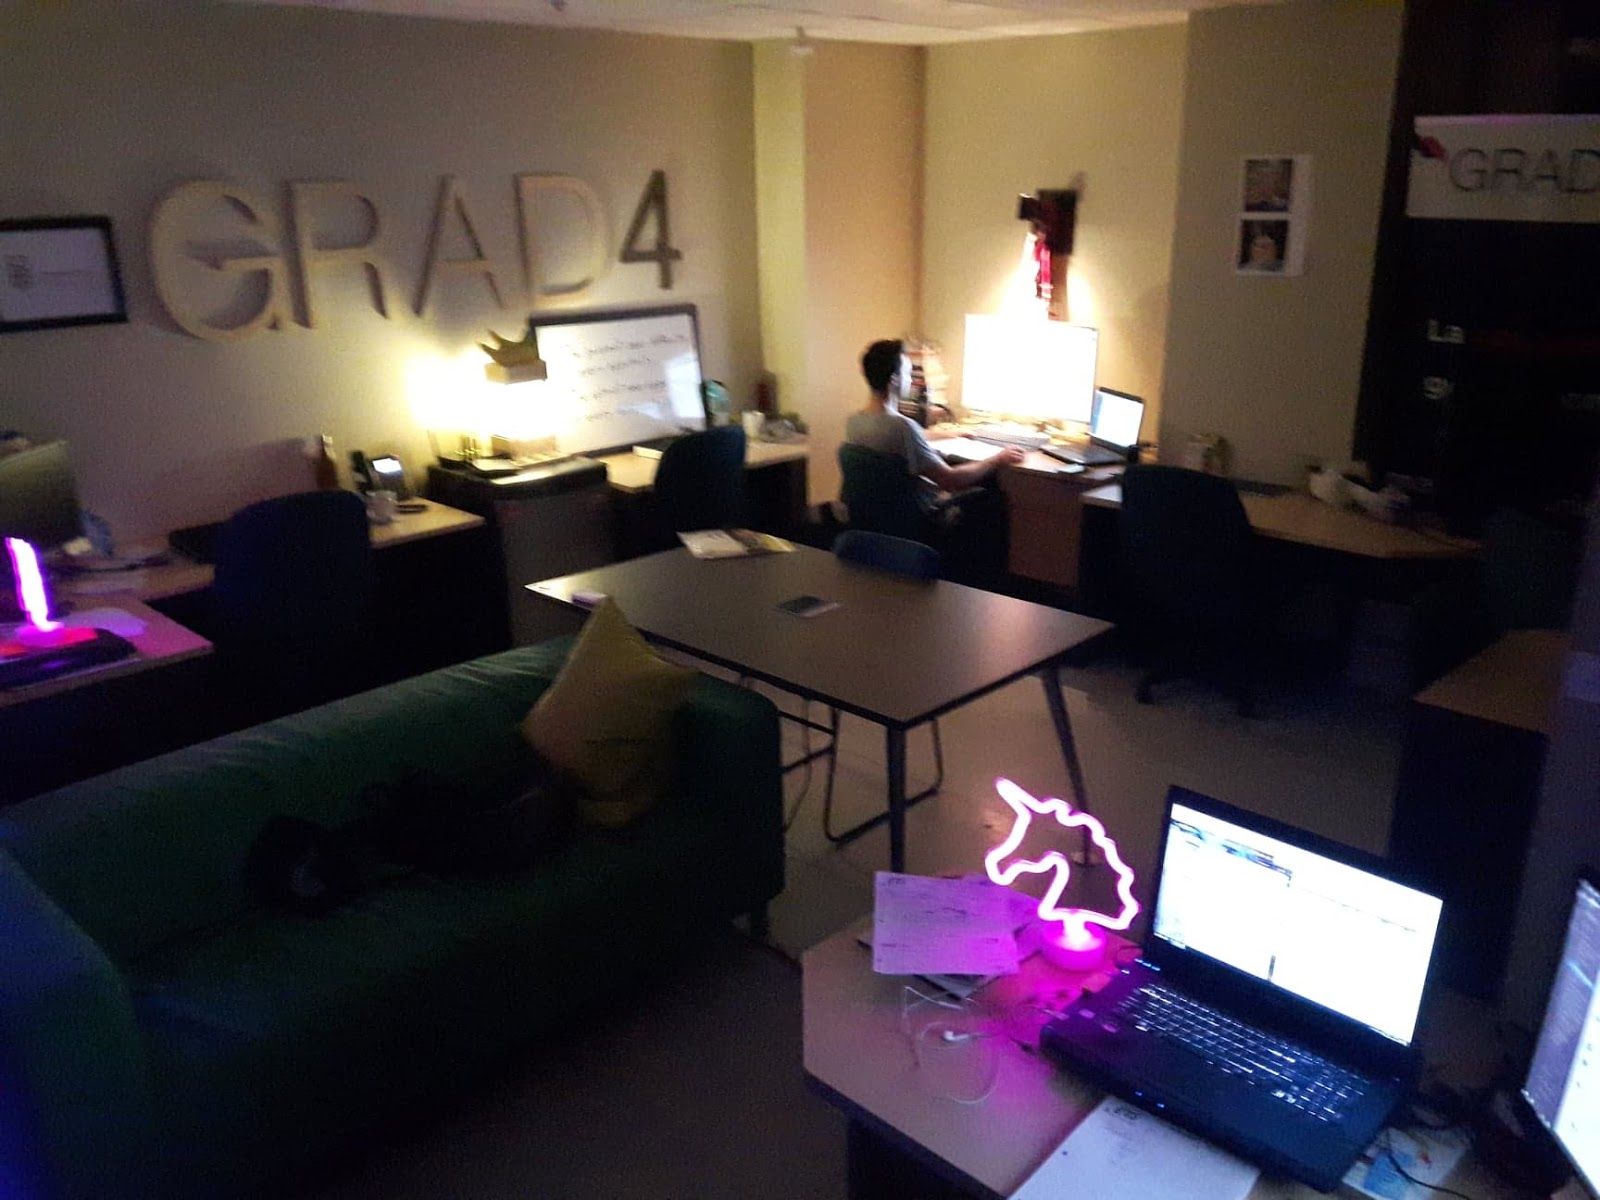 The first office of the company GRAD4 in a basement